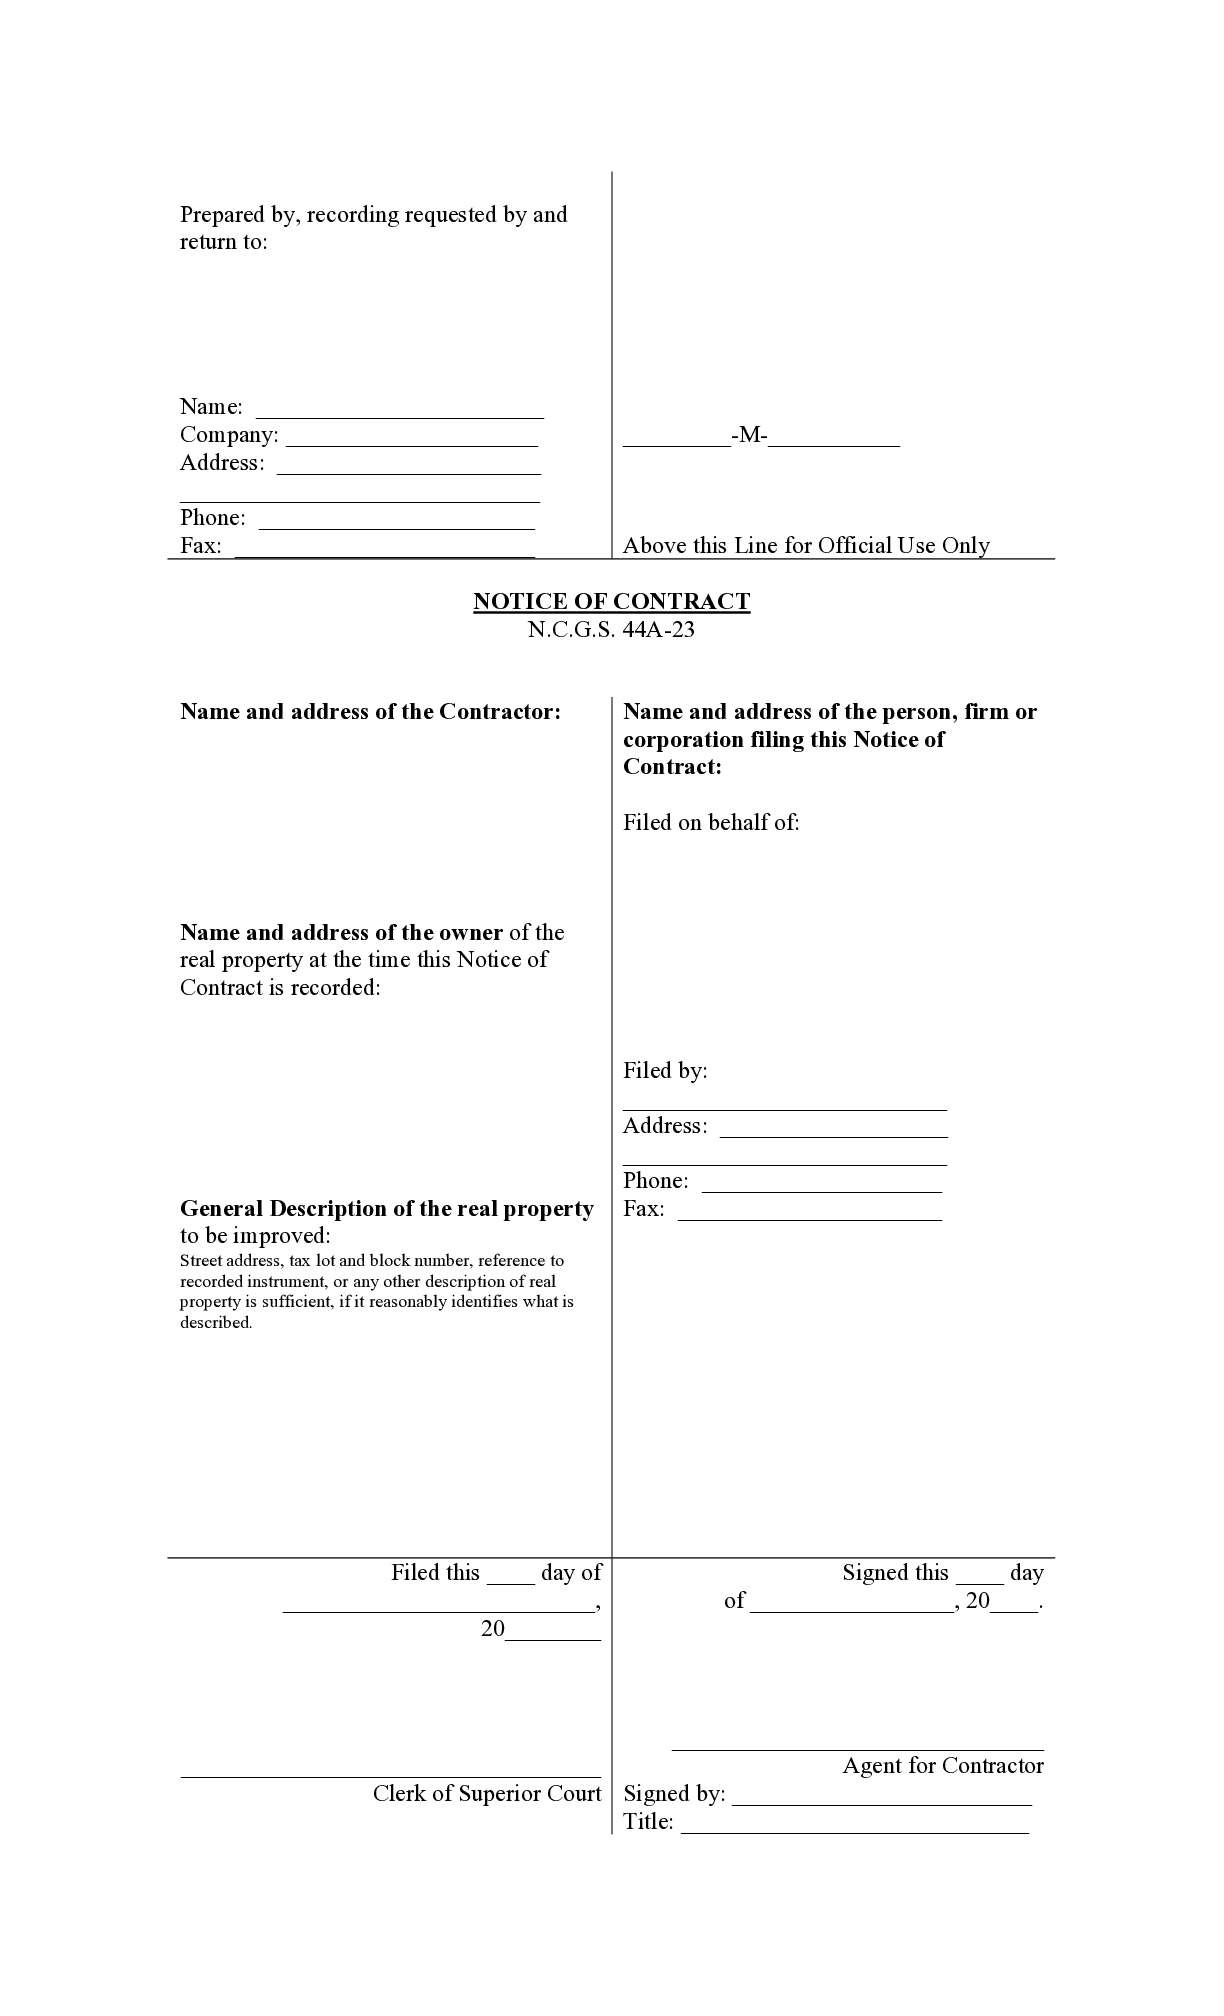 North Carolina Notice of Contract Form - free from